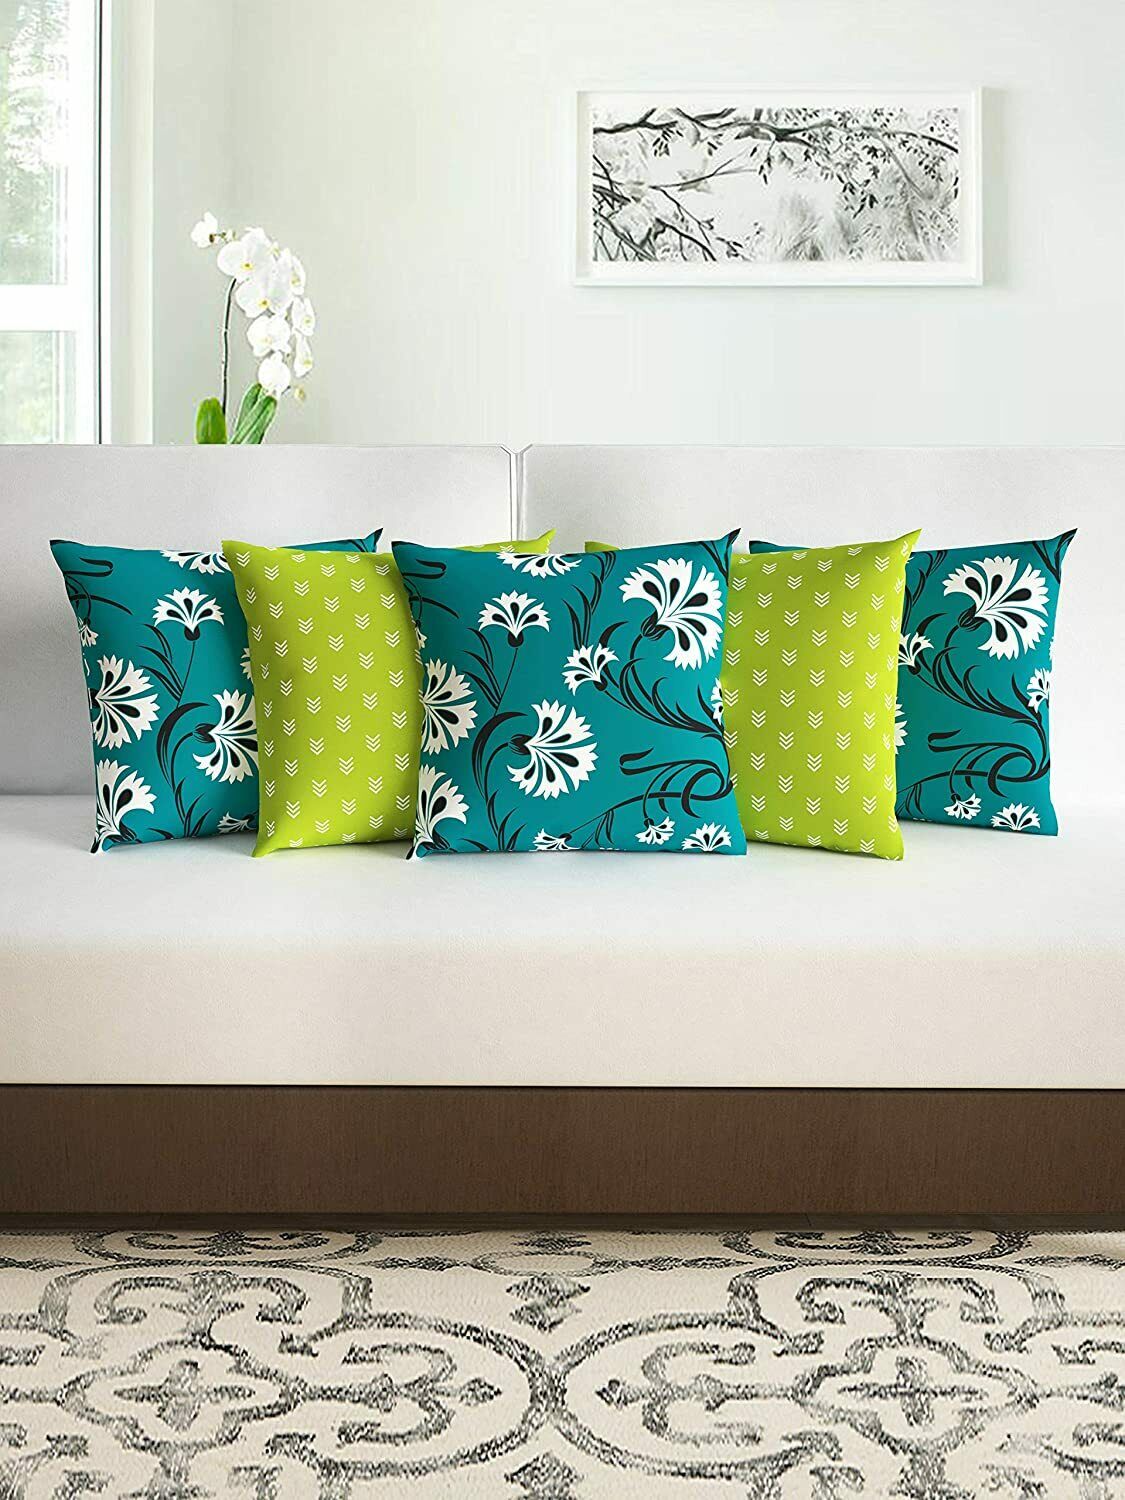 16 X 16 Inch, Lime Green And Green Floral Printed Cushion Covers Set Of 5 Pcs